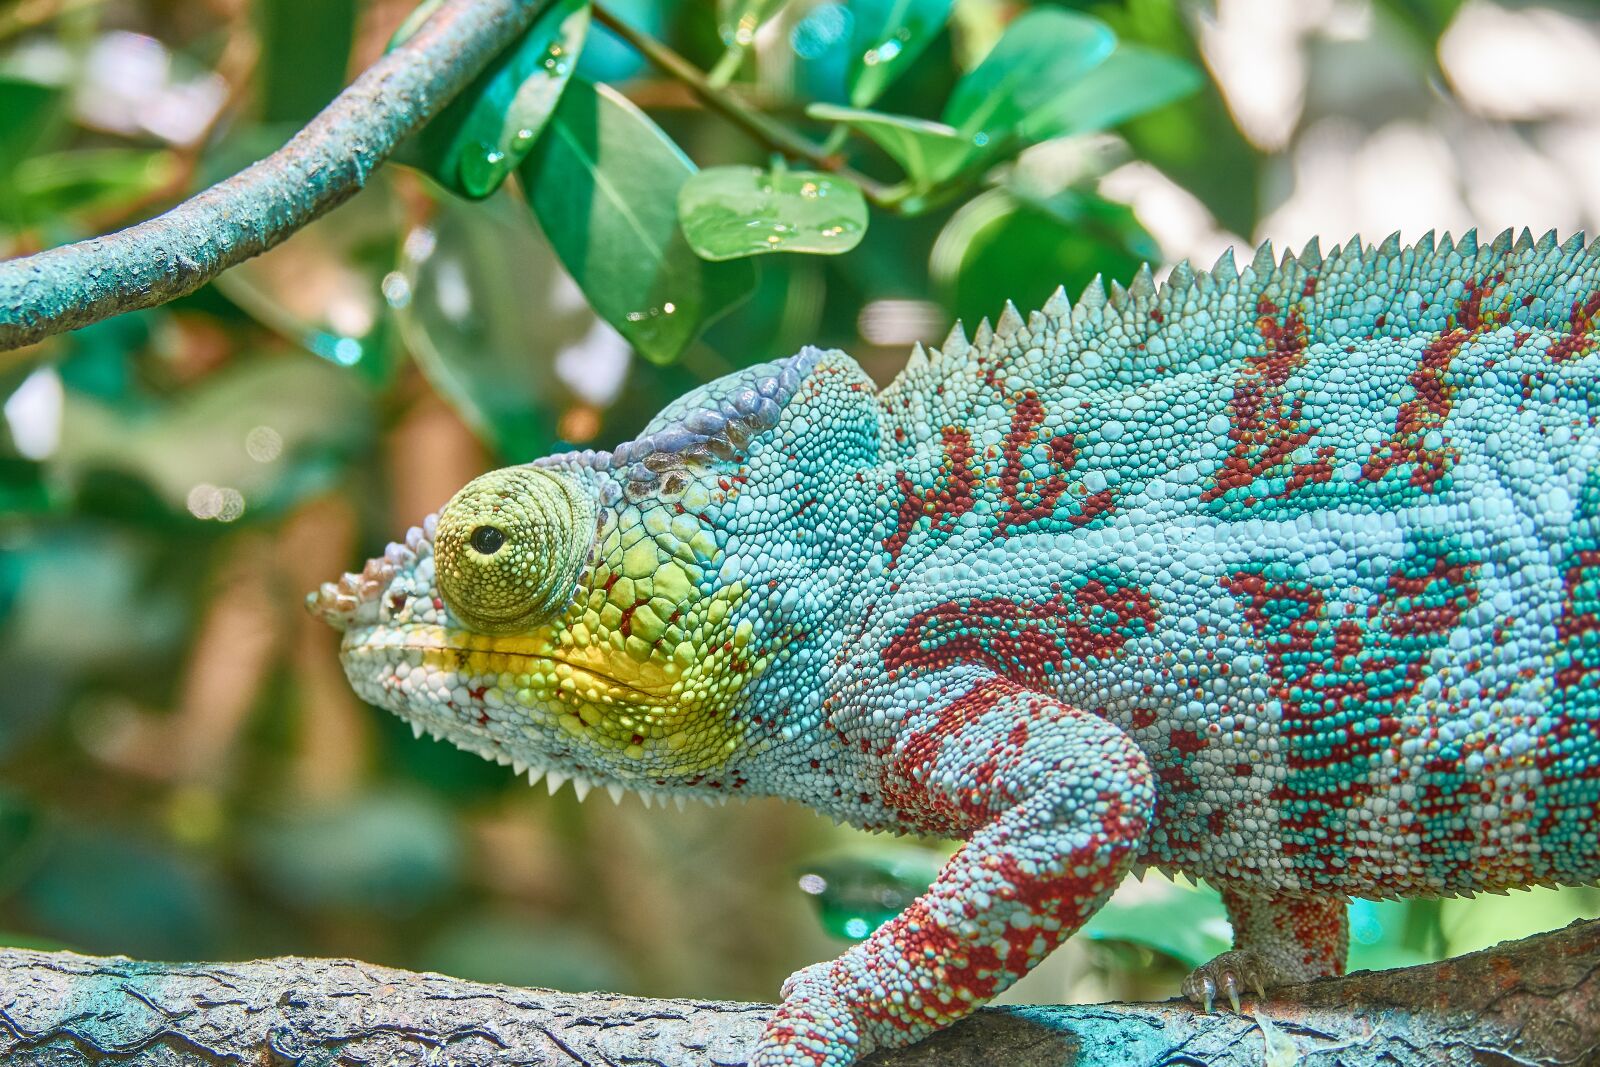 Sony Cyber-shot DSC-RX10 III sample photo. Chameleon, camouflage, exotic photography